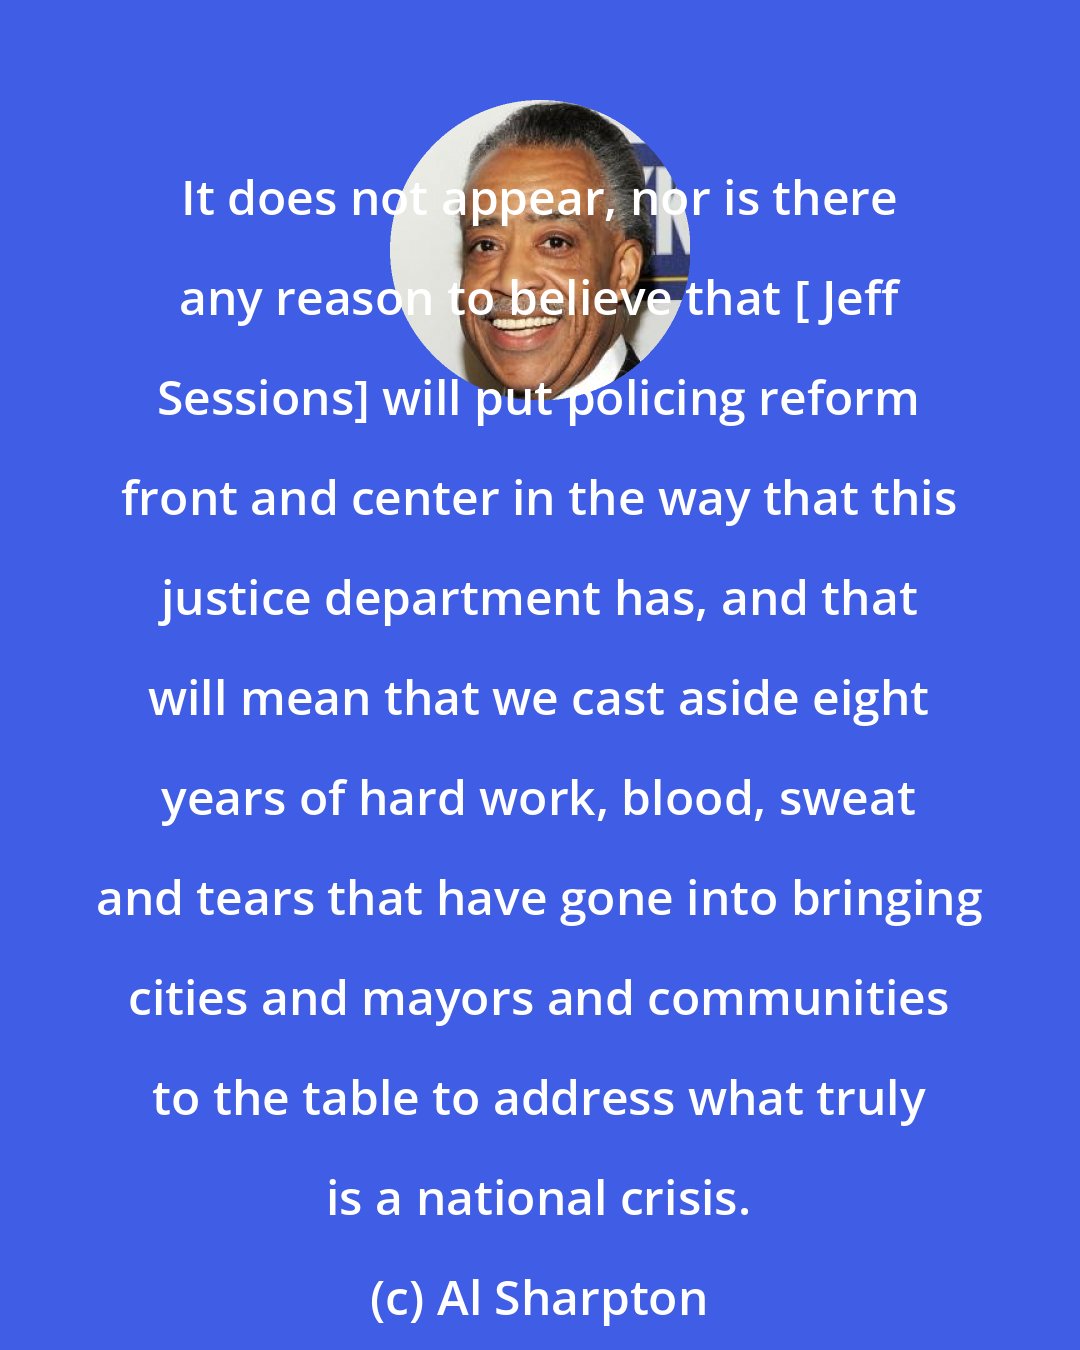 Al Sharpton: It does not appear, nor is there any reason to believe that [ Jeff Sessions] will put policing reform front and center in the way that this justice department has, and that will mean that we cast aside eight years of hard work, blood, sweat and tears that have gone into bringing cities and mayors and communities to the table to address what truly is a national crisis.